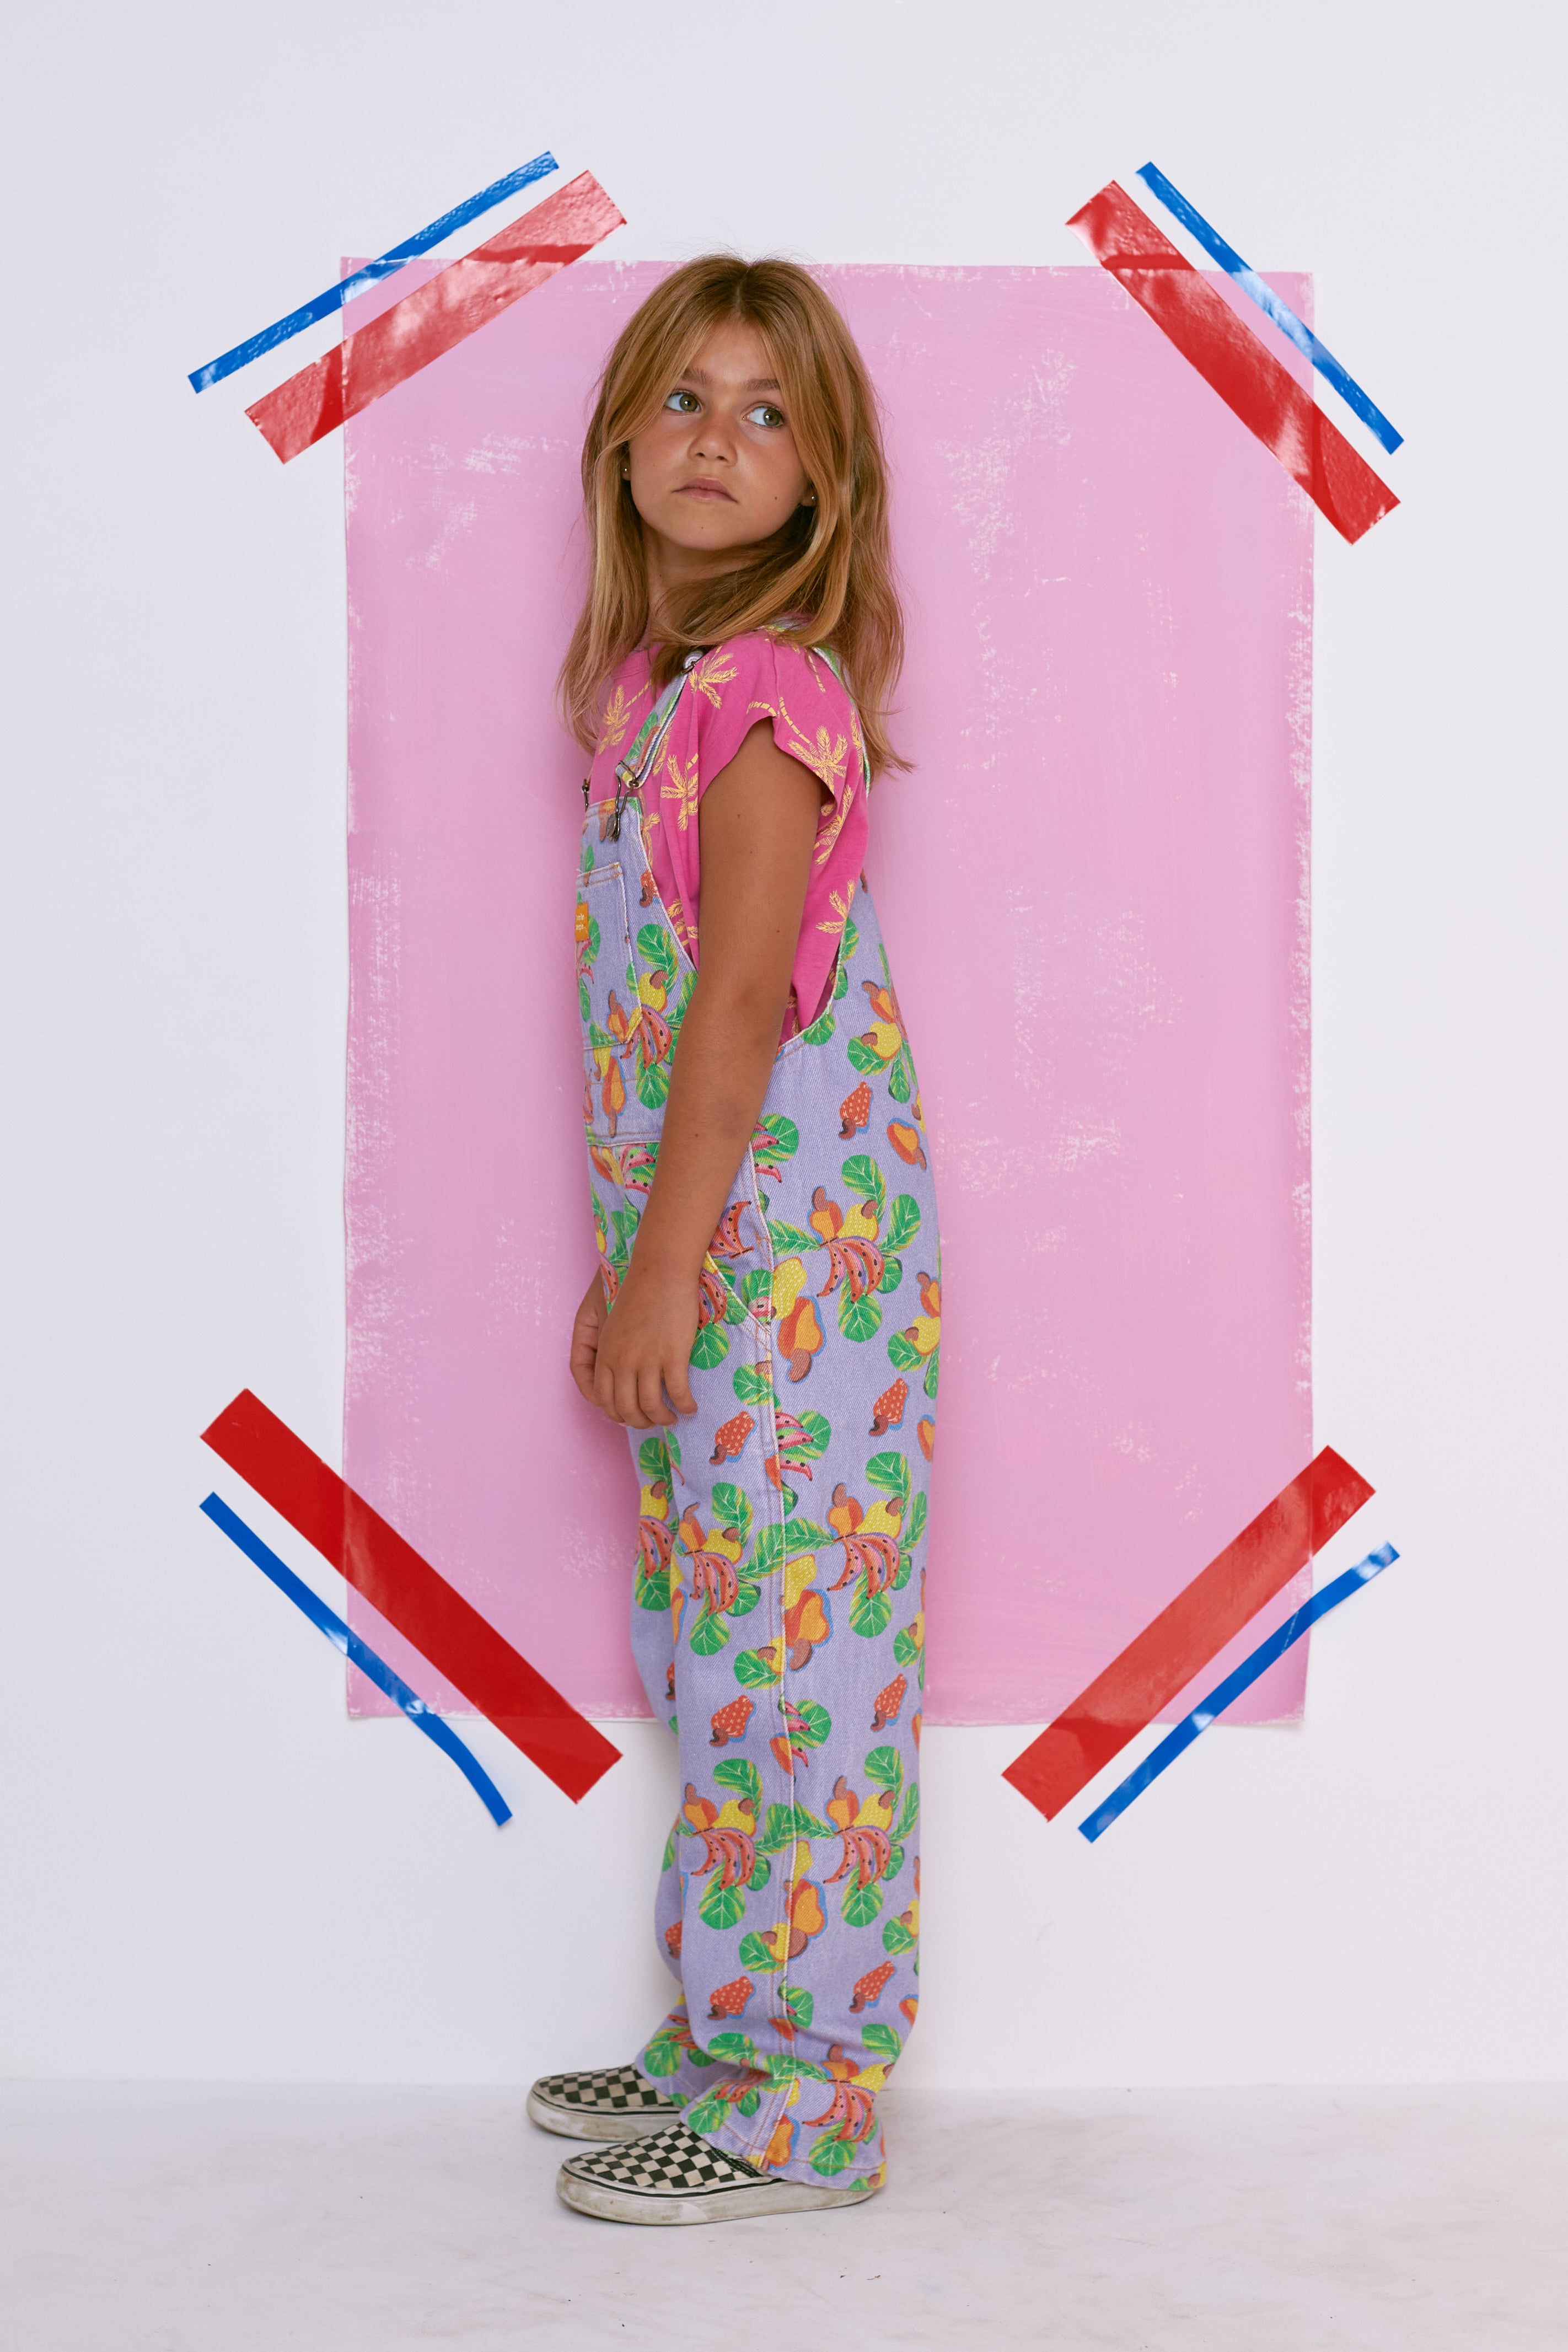 Buy Blue Dungarees &Playsuits for Girls by RIO GIRLS Online